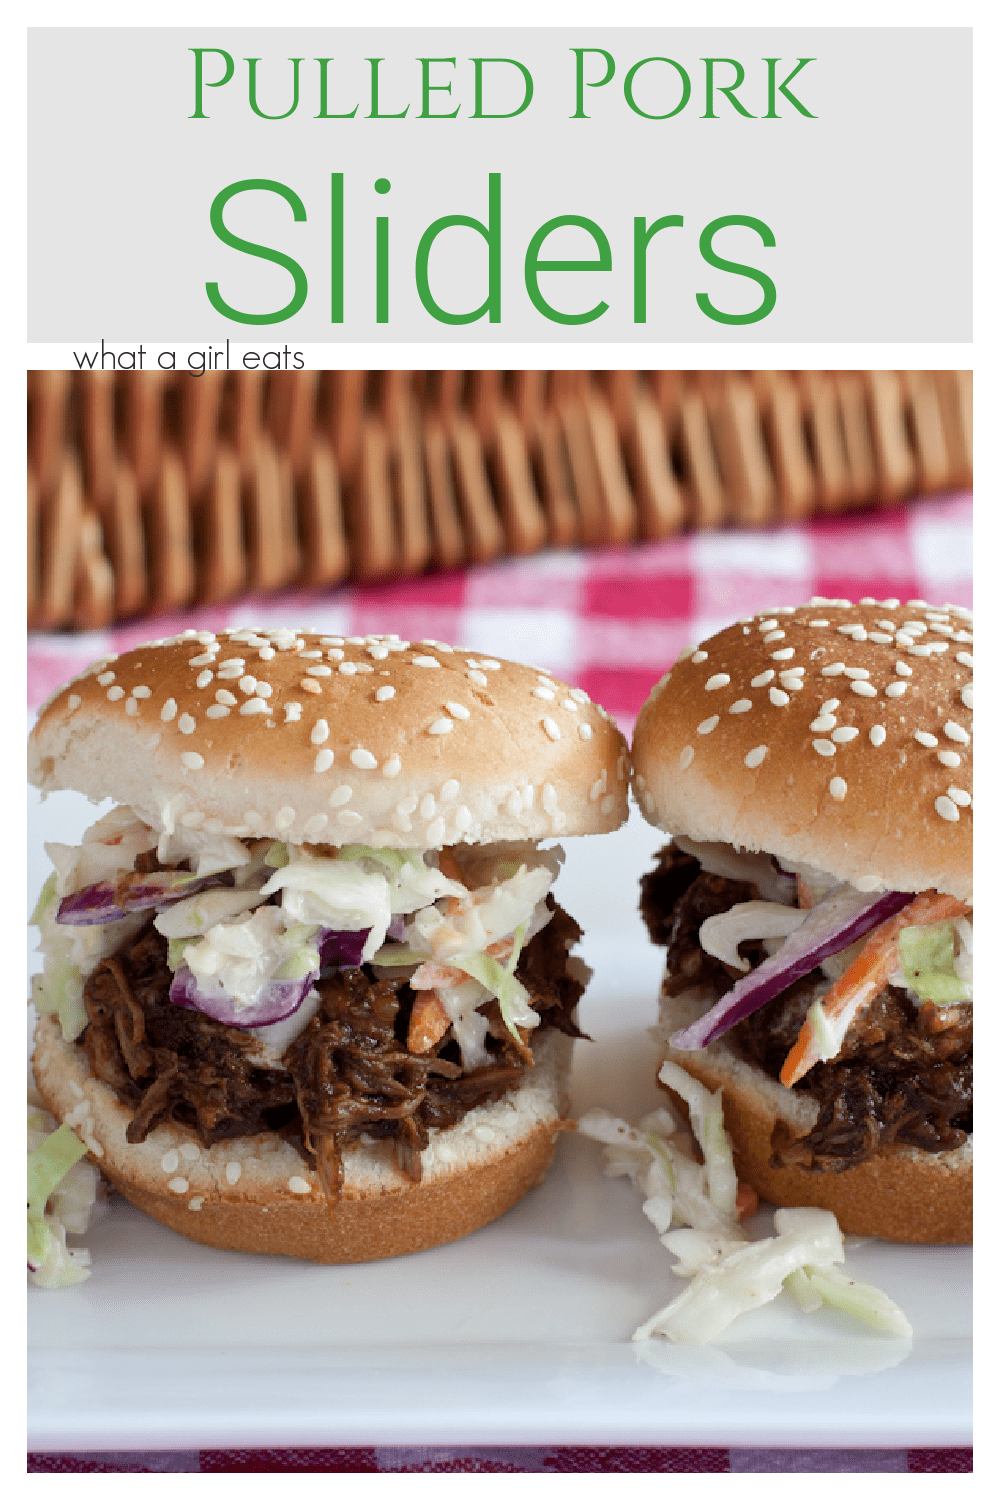 Pulled pork sliders are the perfect summer or game day food. Pork is dry rubbed with spicy, smoky flavors, then slow cooked and served with coleslaw.